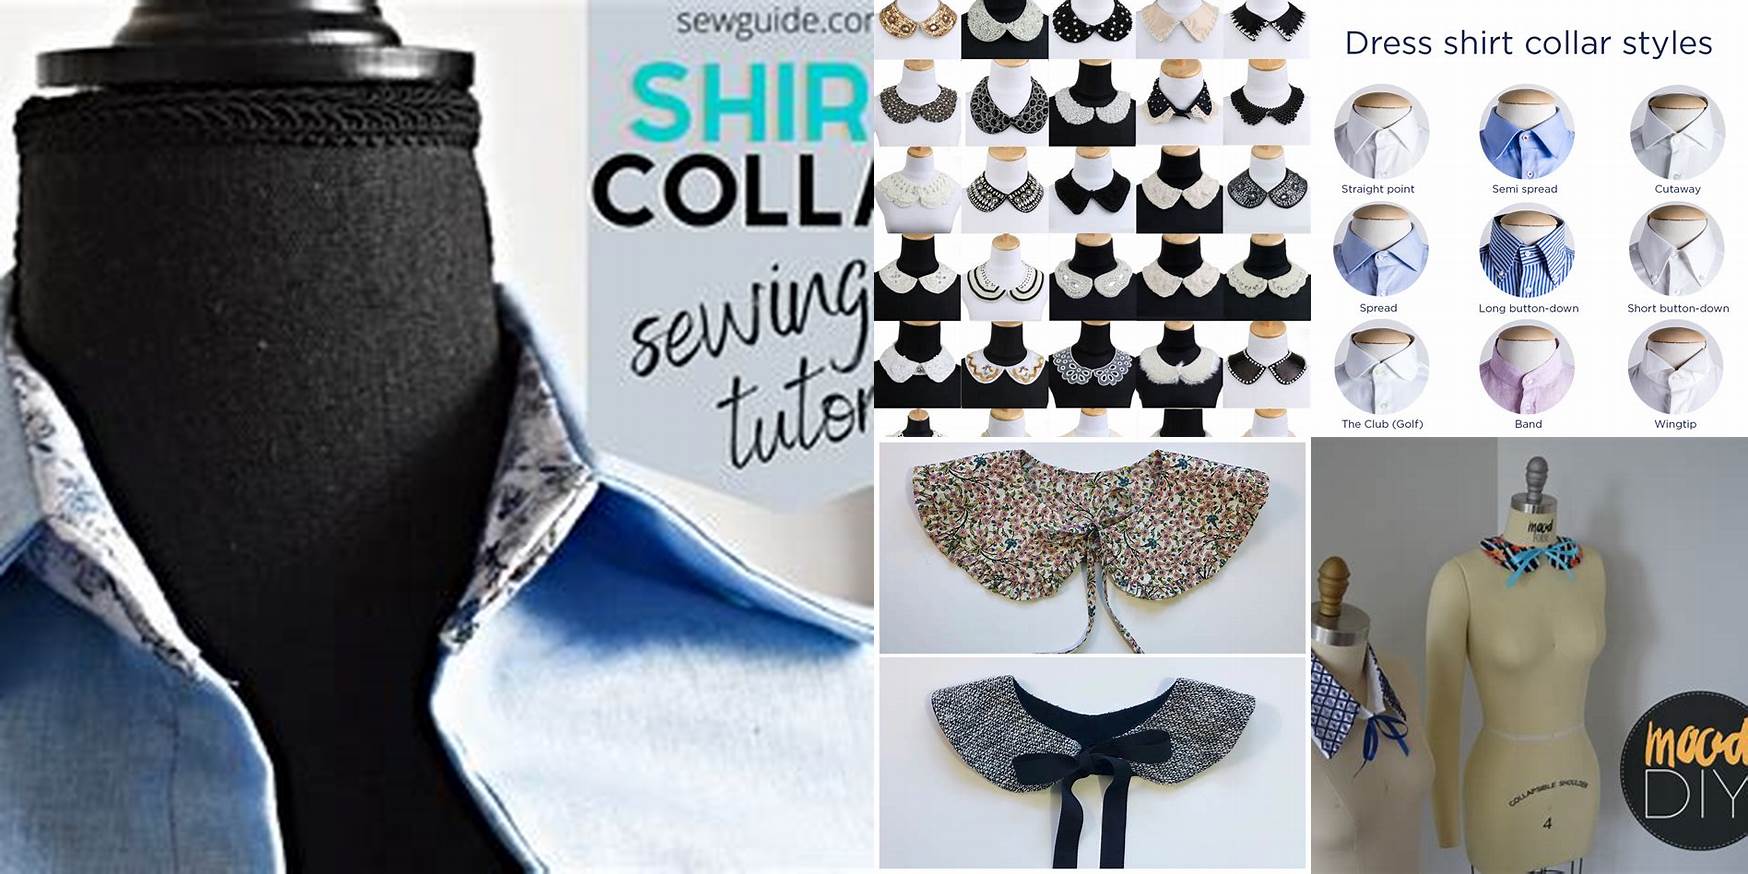 How To Add A Collar To A Dress